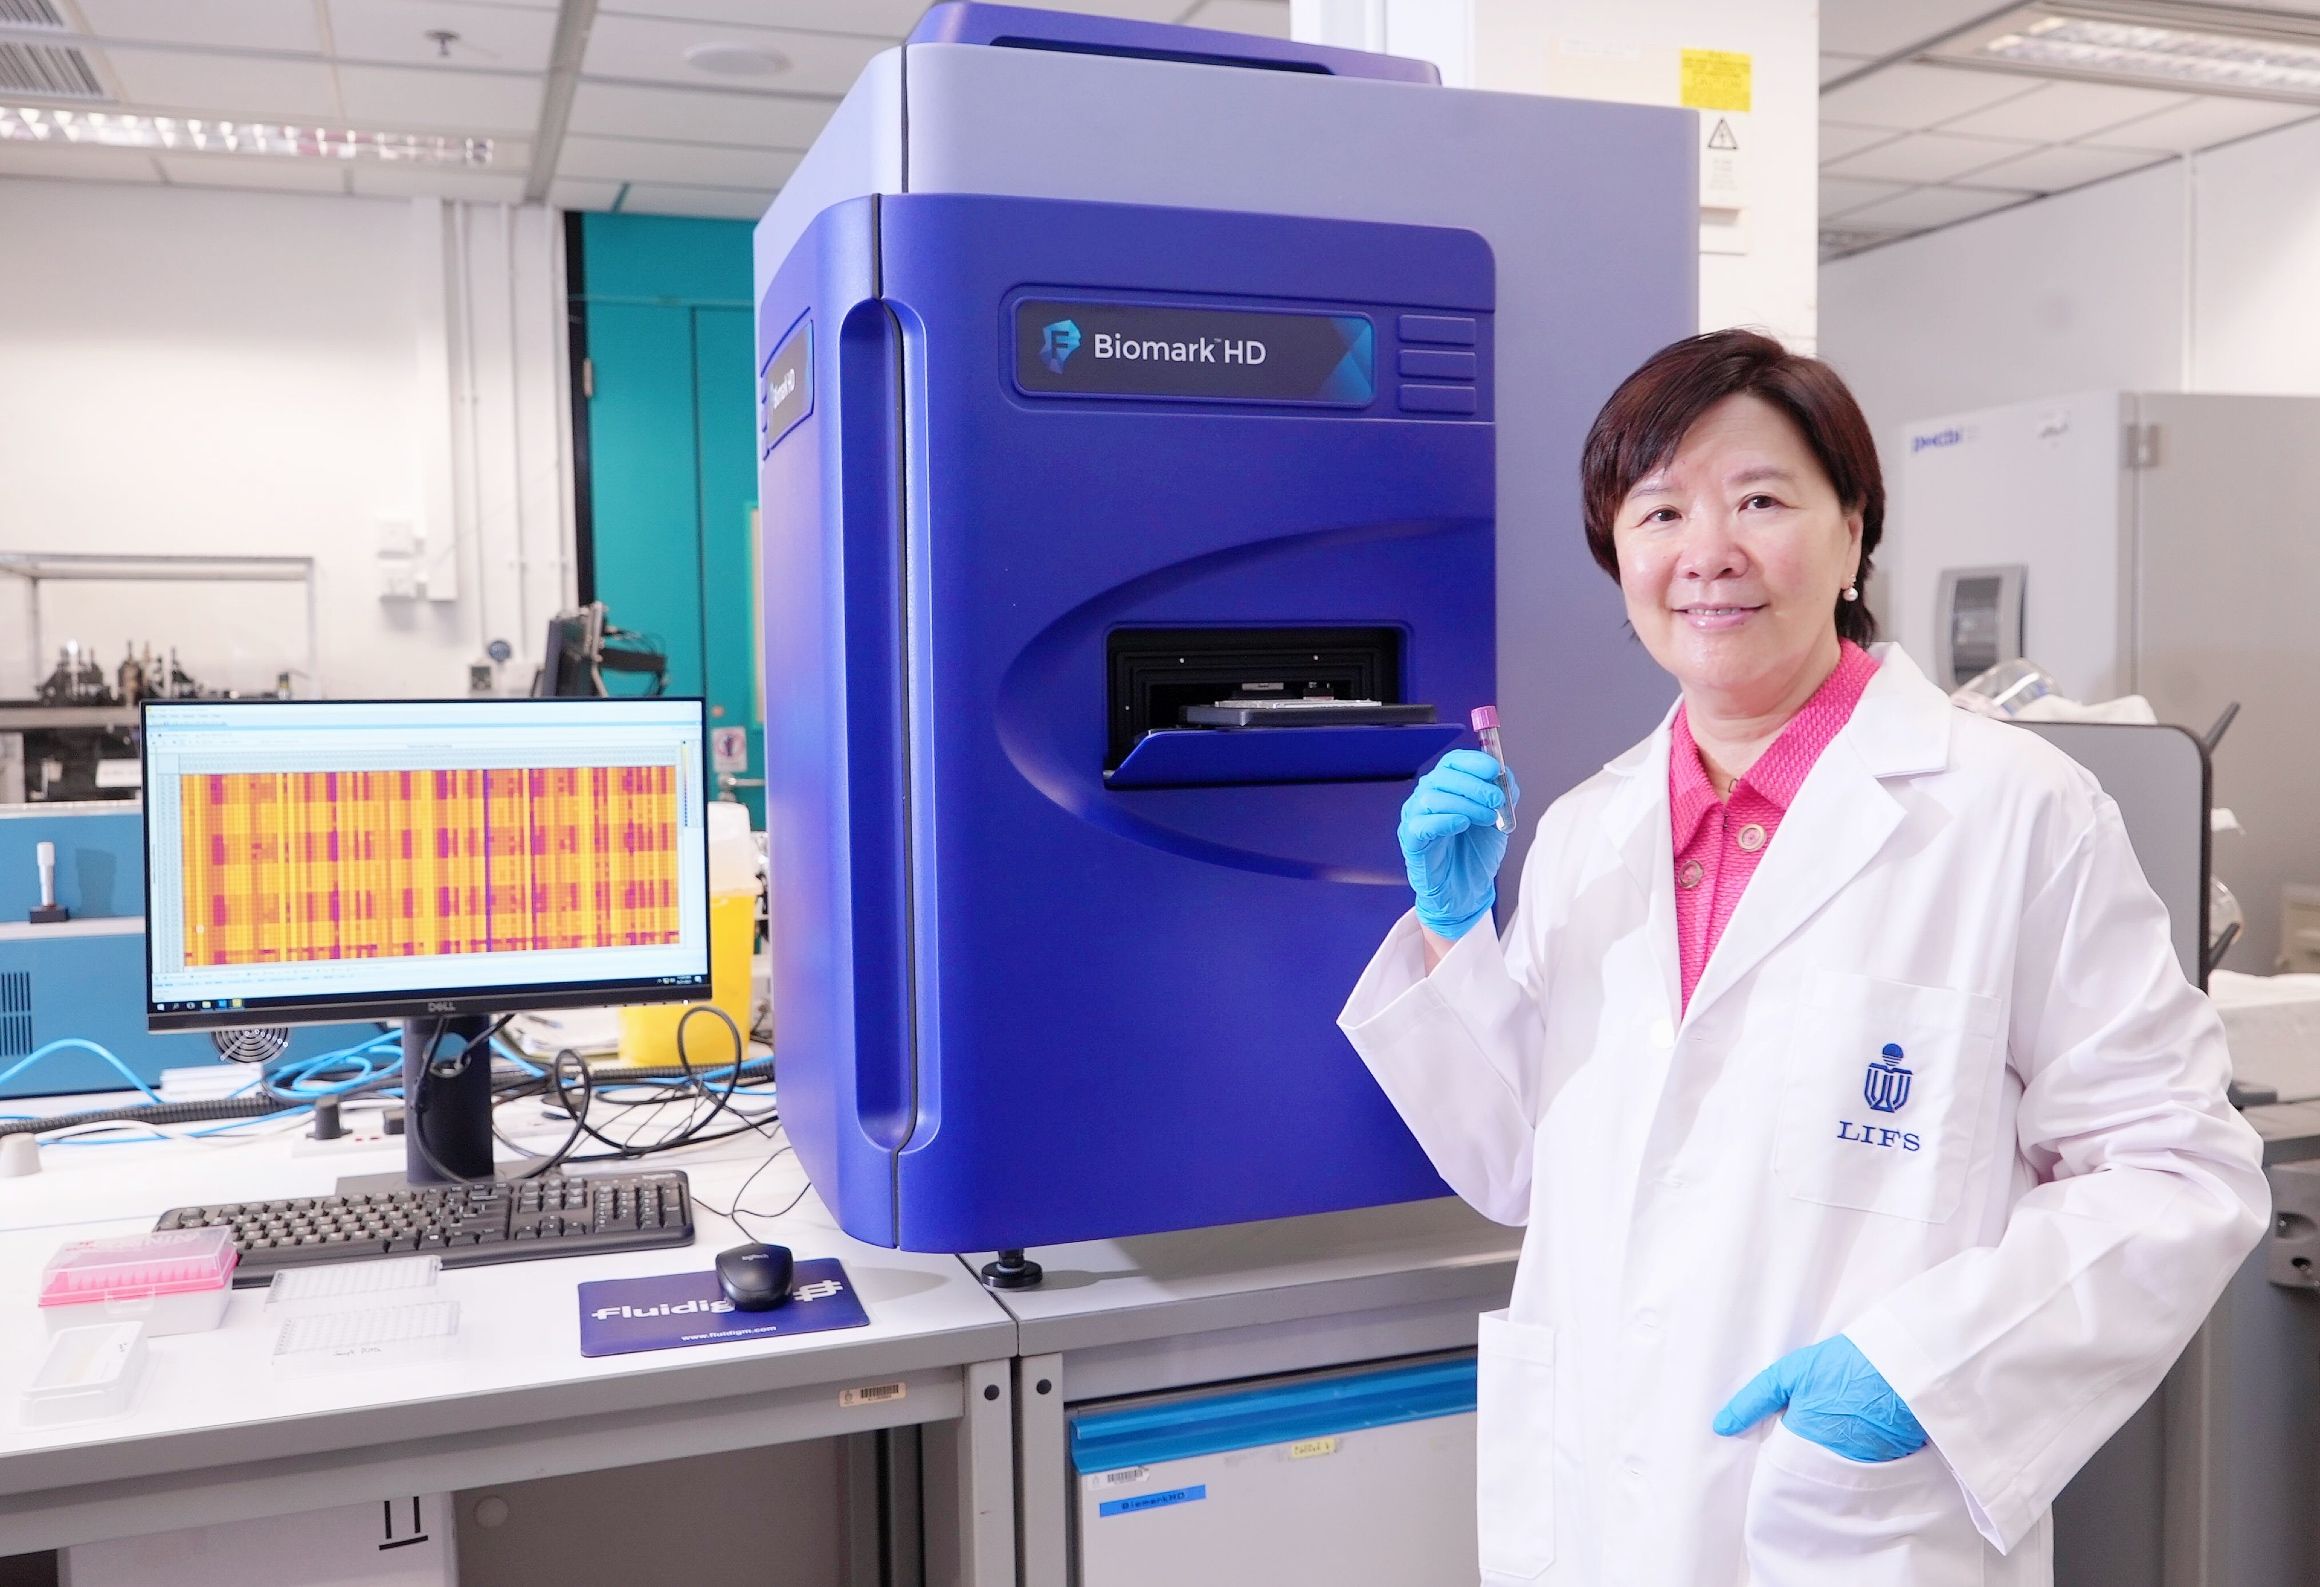 Using the pictured blue device that performs the ultrasensitive proximity extension assay, Prof. Ip and her team developed a blood test for early detection and screening of Alzheimer’s disease from Chinese patient data, with an accuracy level of over 96%.